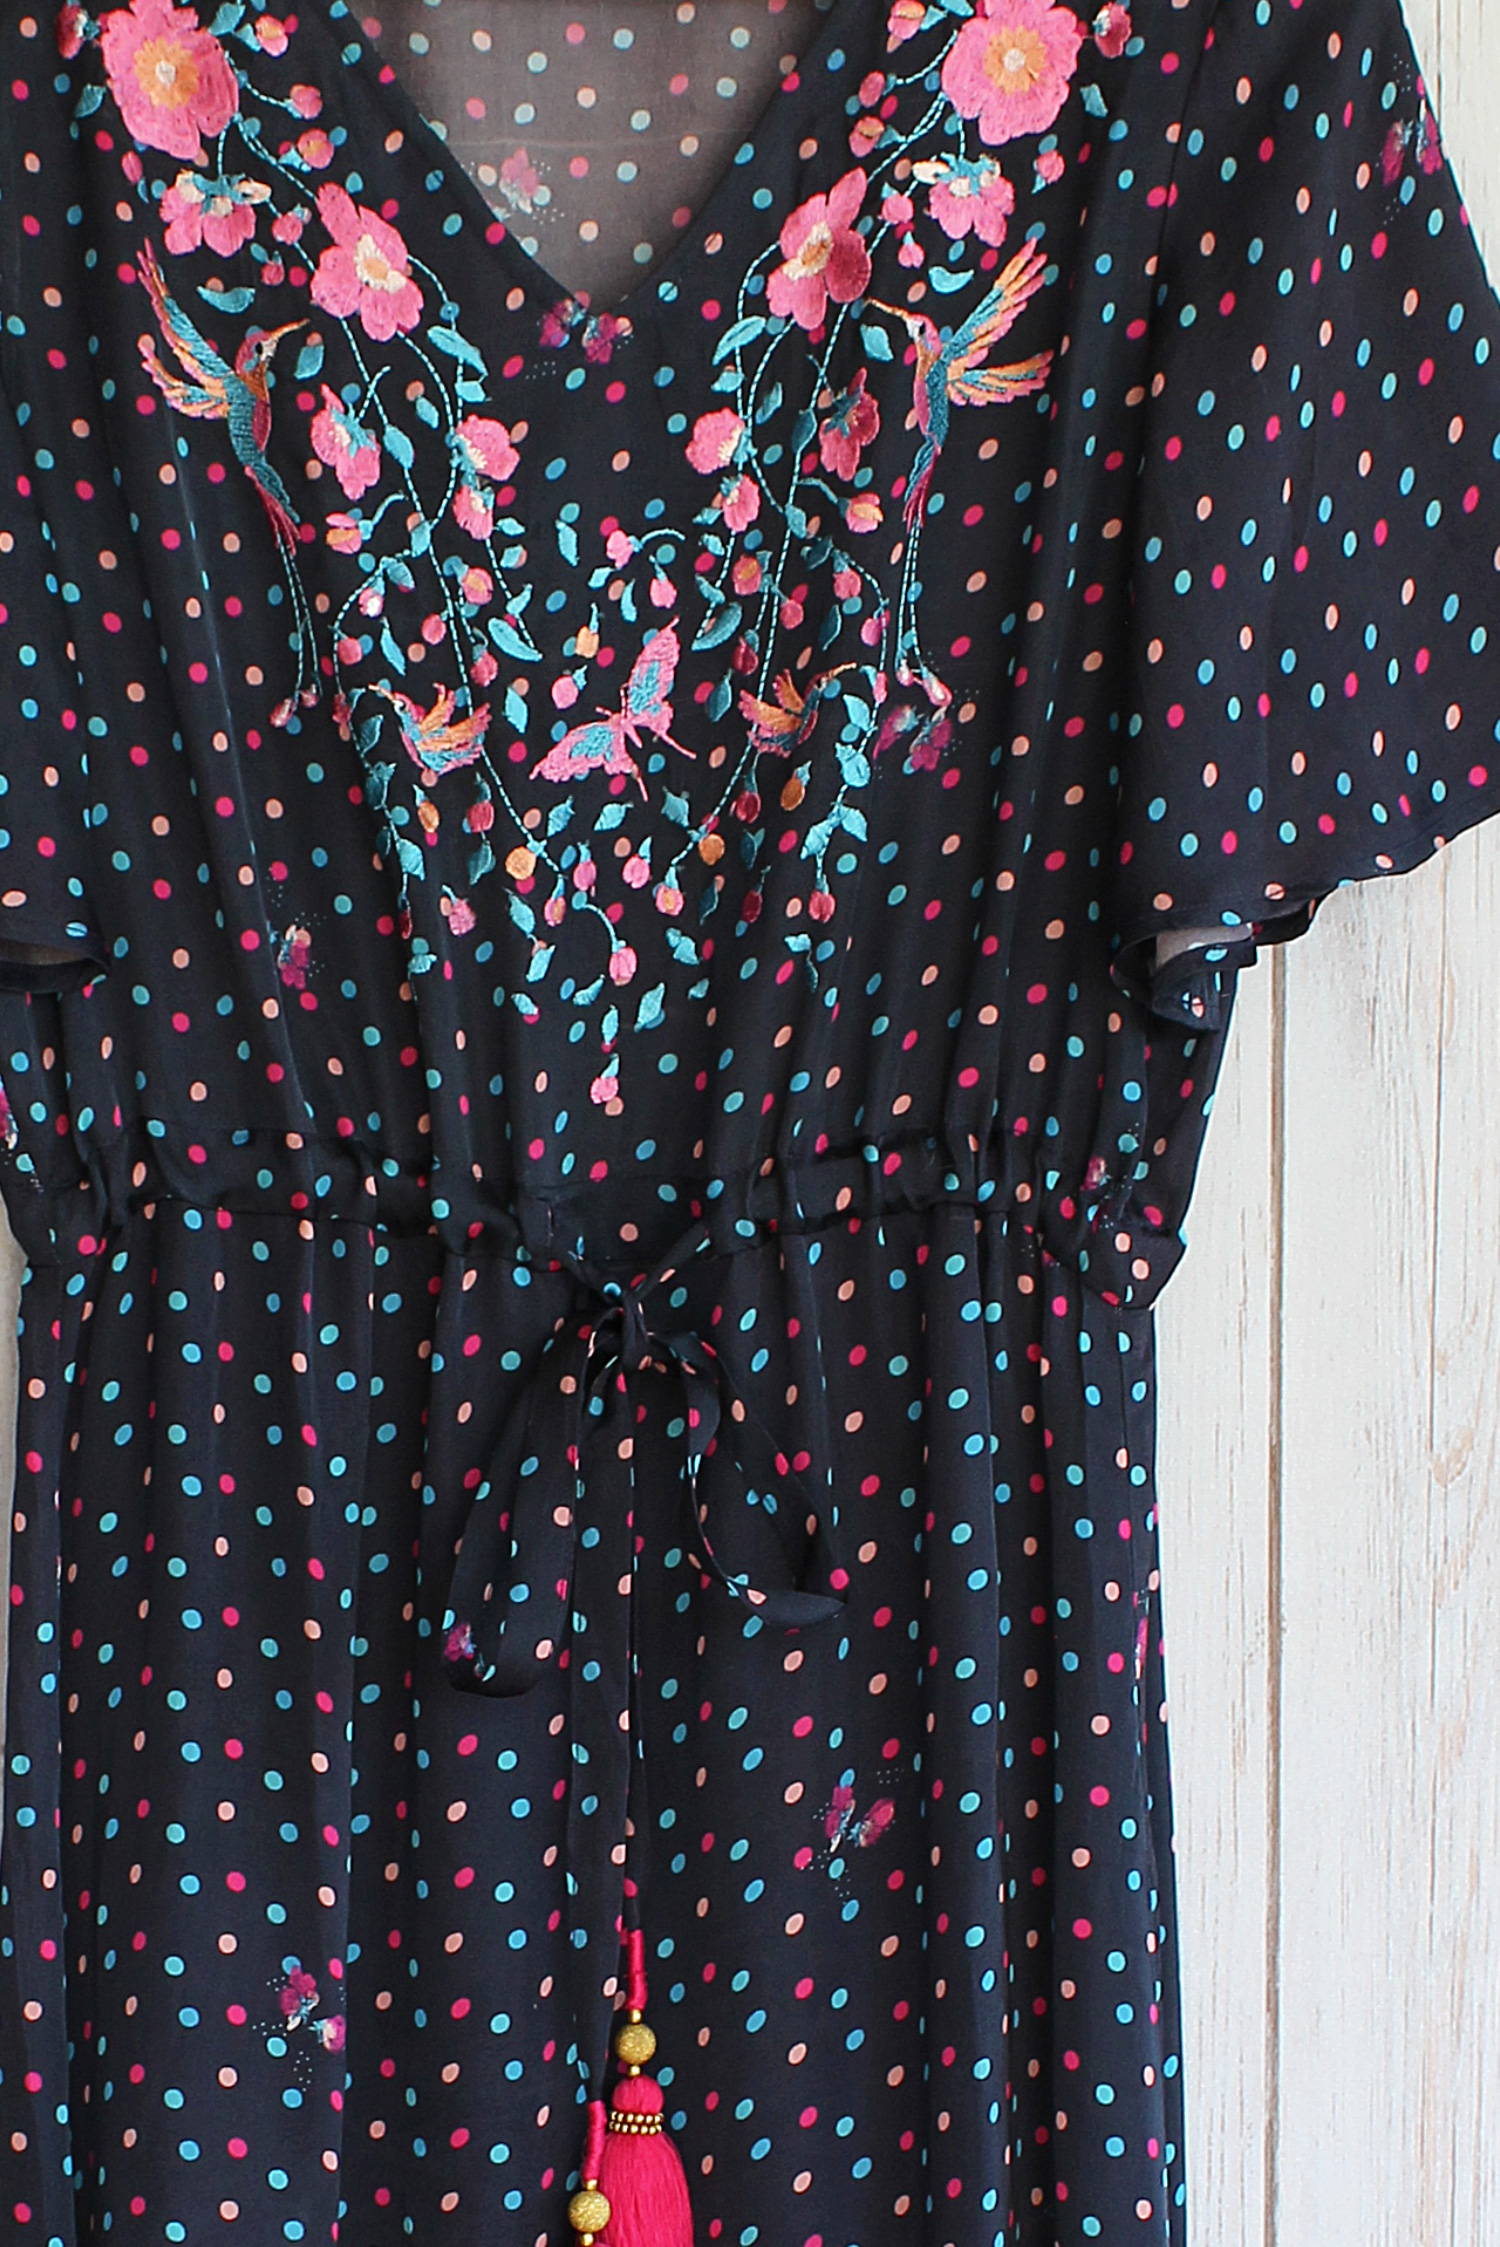 Liana Embroidered Dress in Navy Dot